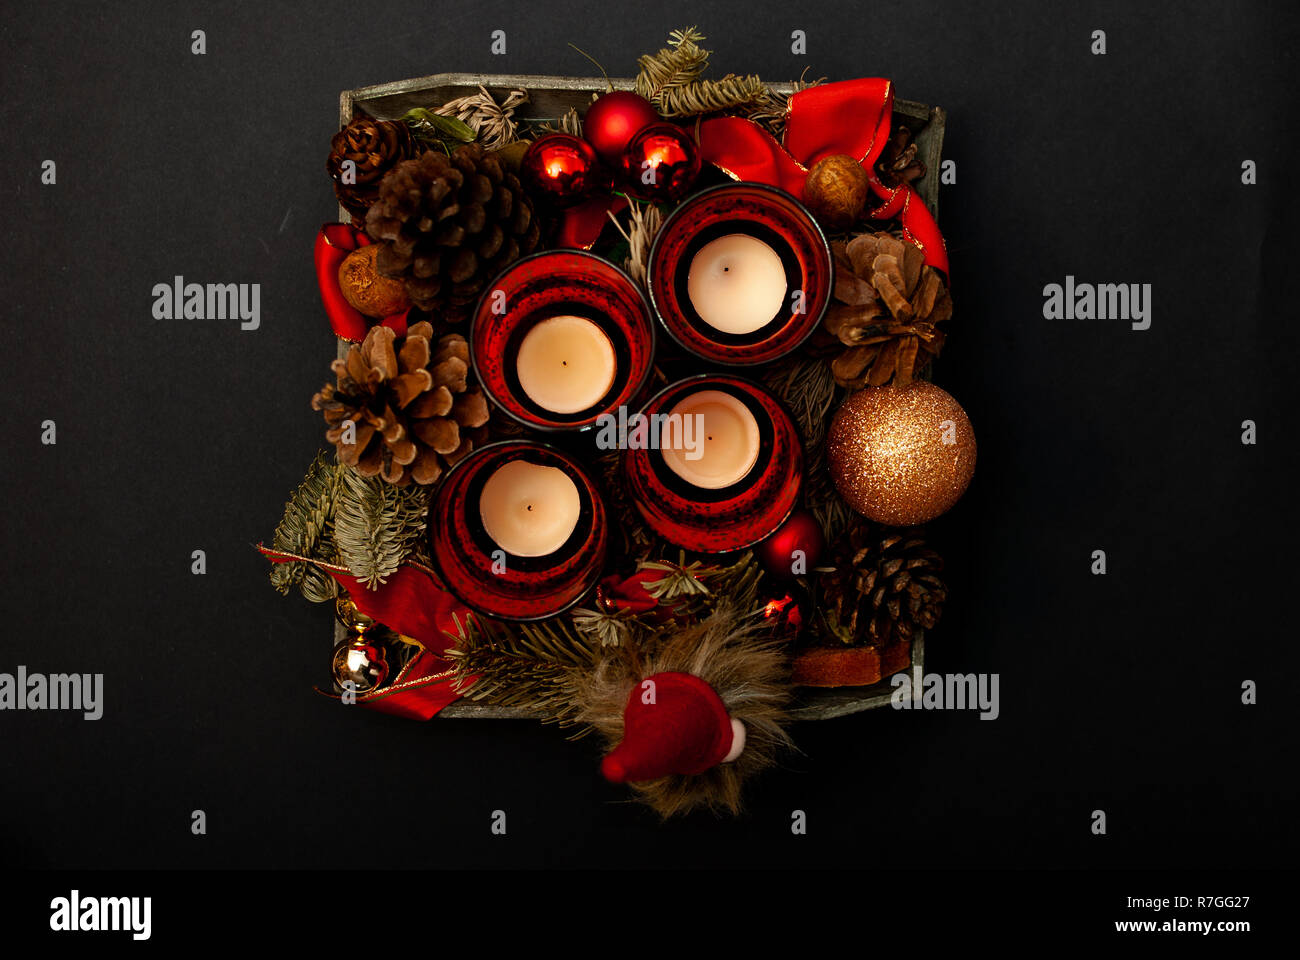 Top view of Advent wreath with four candles, fir tree, christmas balls, a dwarf and a fir cone on black background Stock Photo